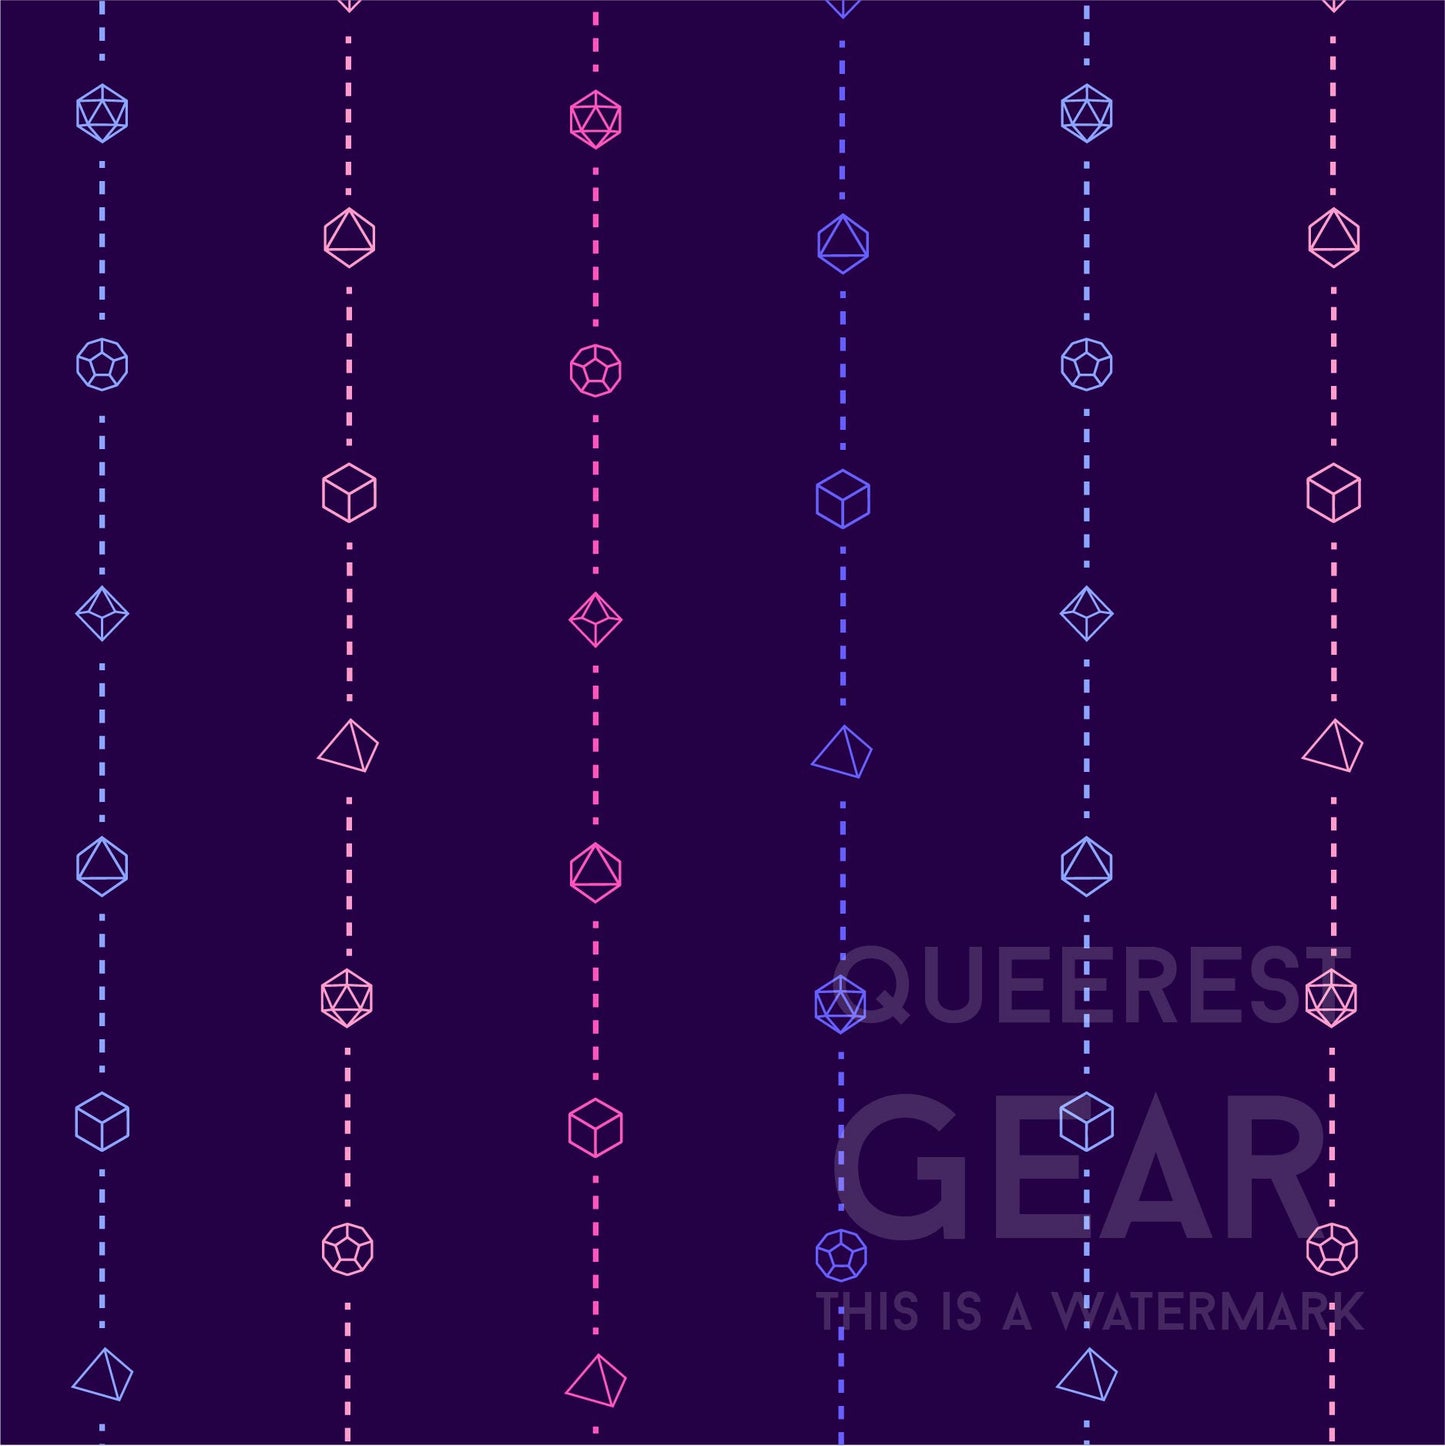 close-up of the omnisexual pride dice pattern. the background is dark purple and has stripes of dashed lines and polyhedral dnd dice in blues and pinks